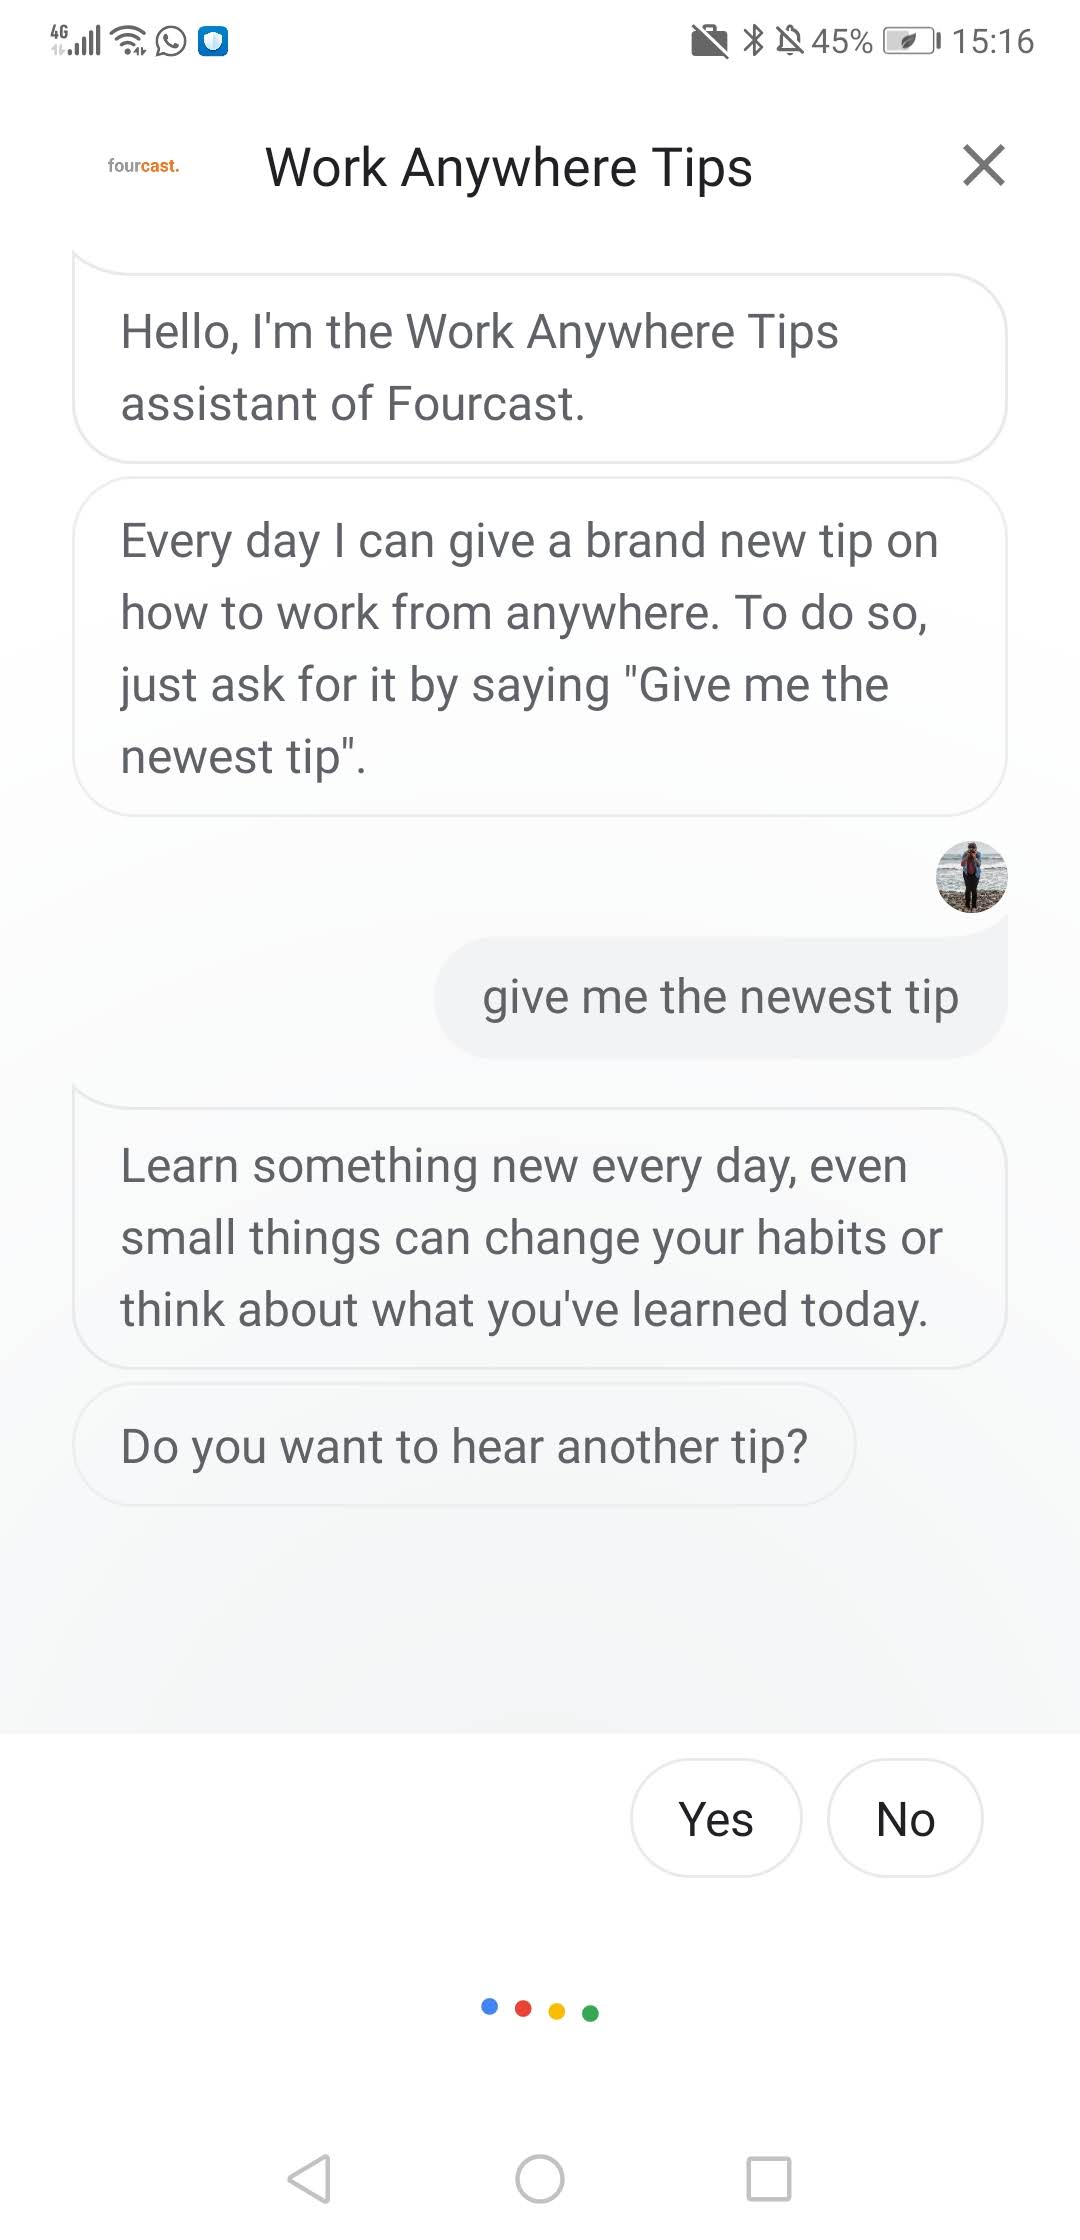 Work Anywhere Tips Voice bot Google Assistant